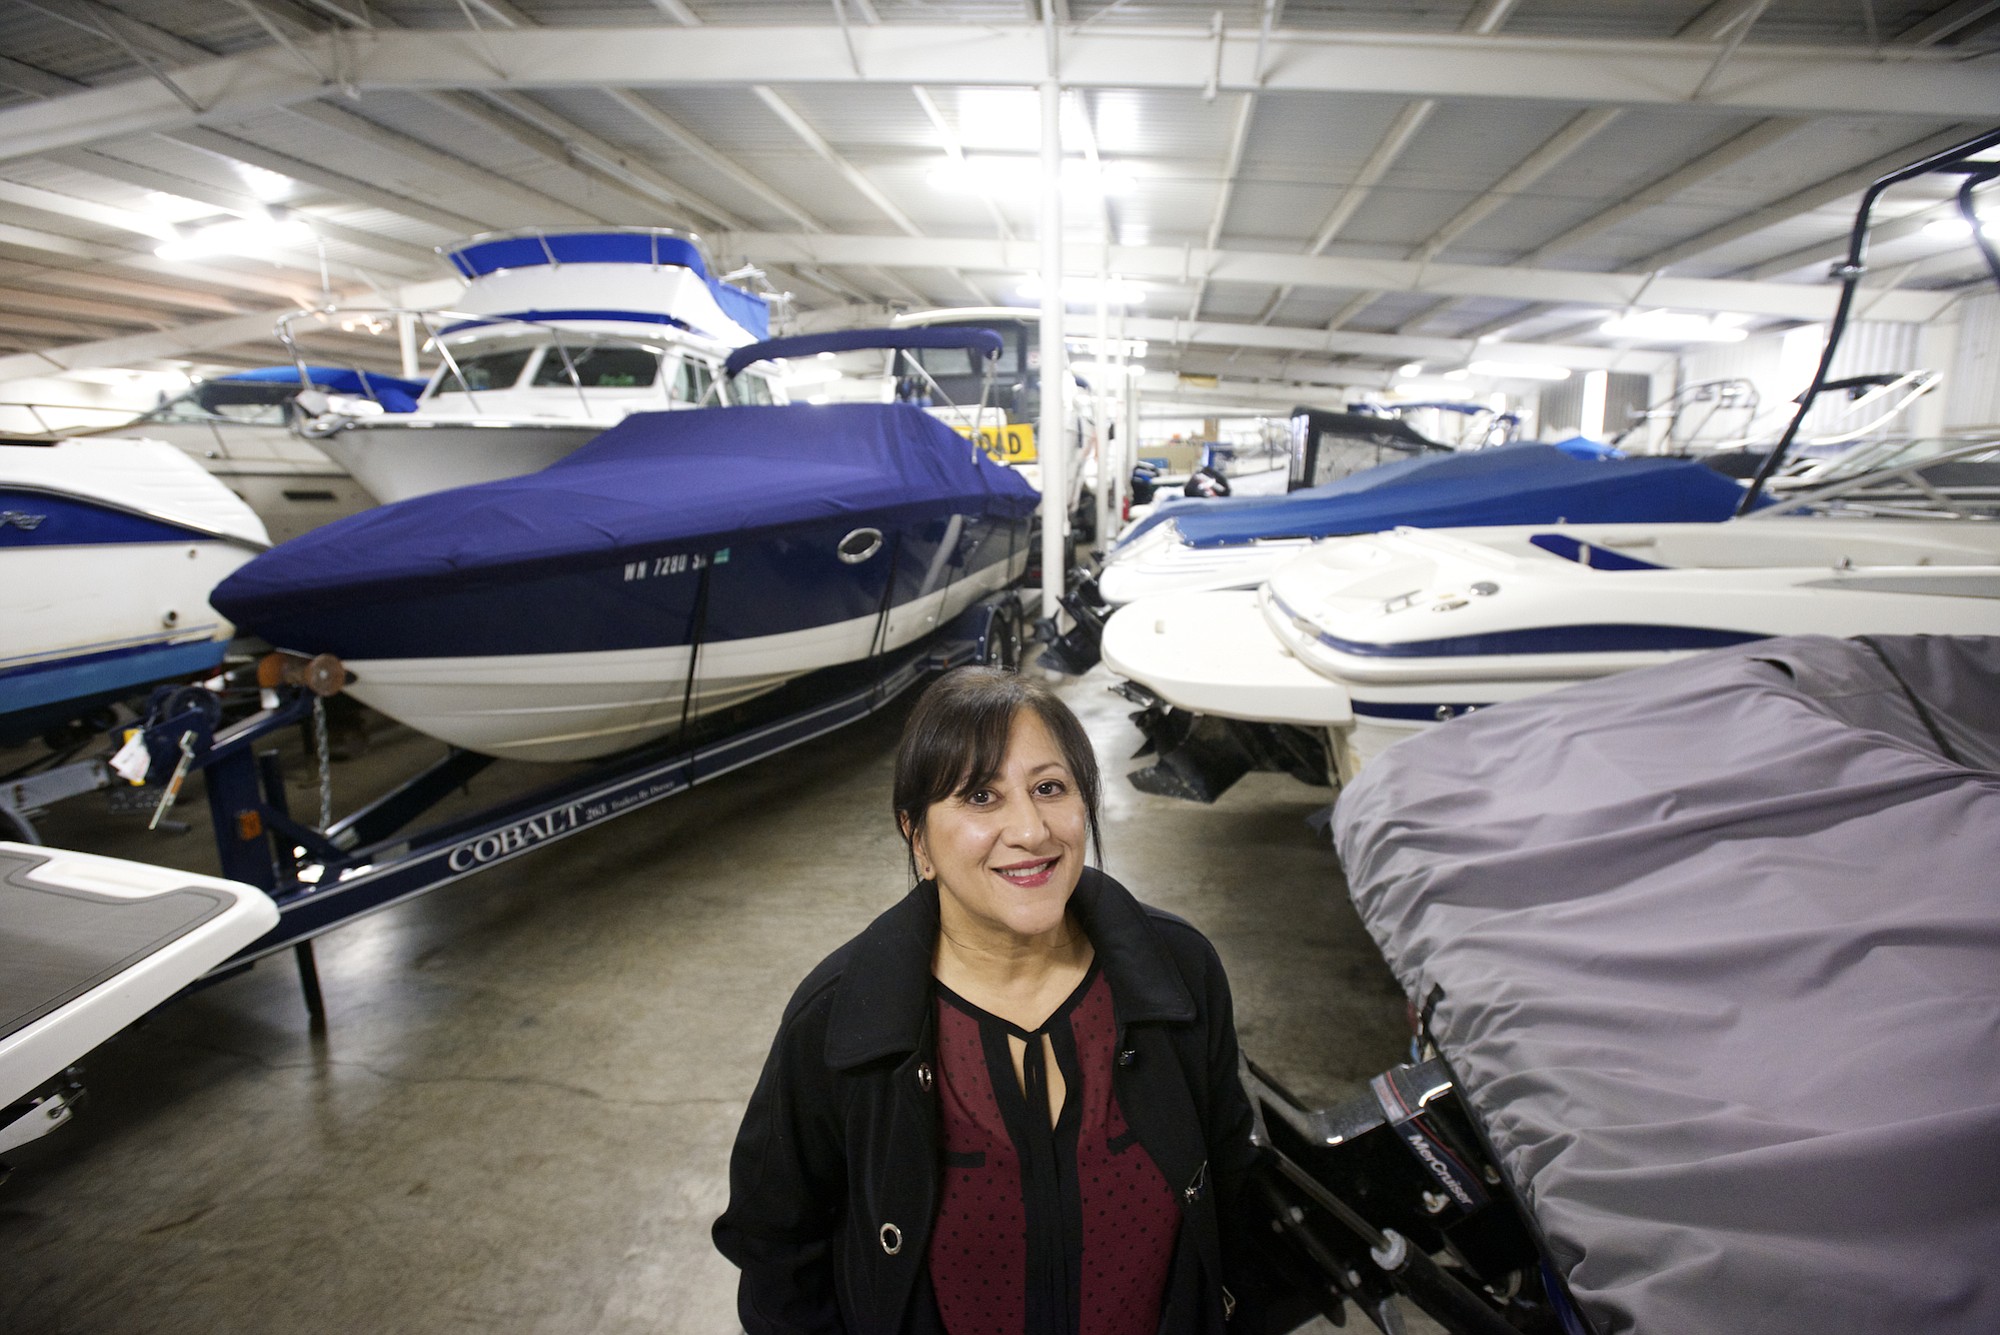 Marianne Guetter, owner of Riverside Marine Service in Washougal, started her boat repair and maintenance business 15 years ago.